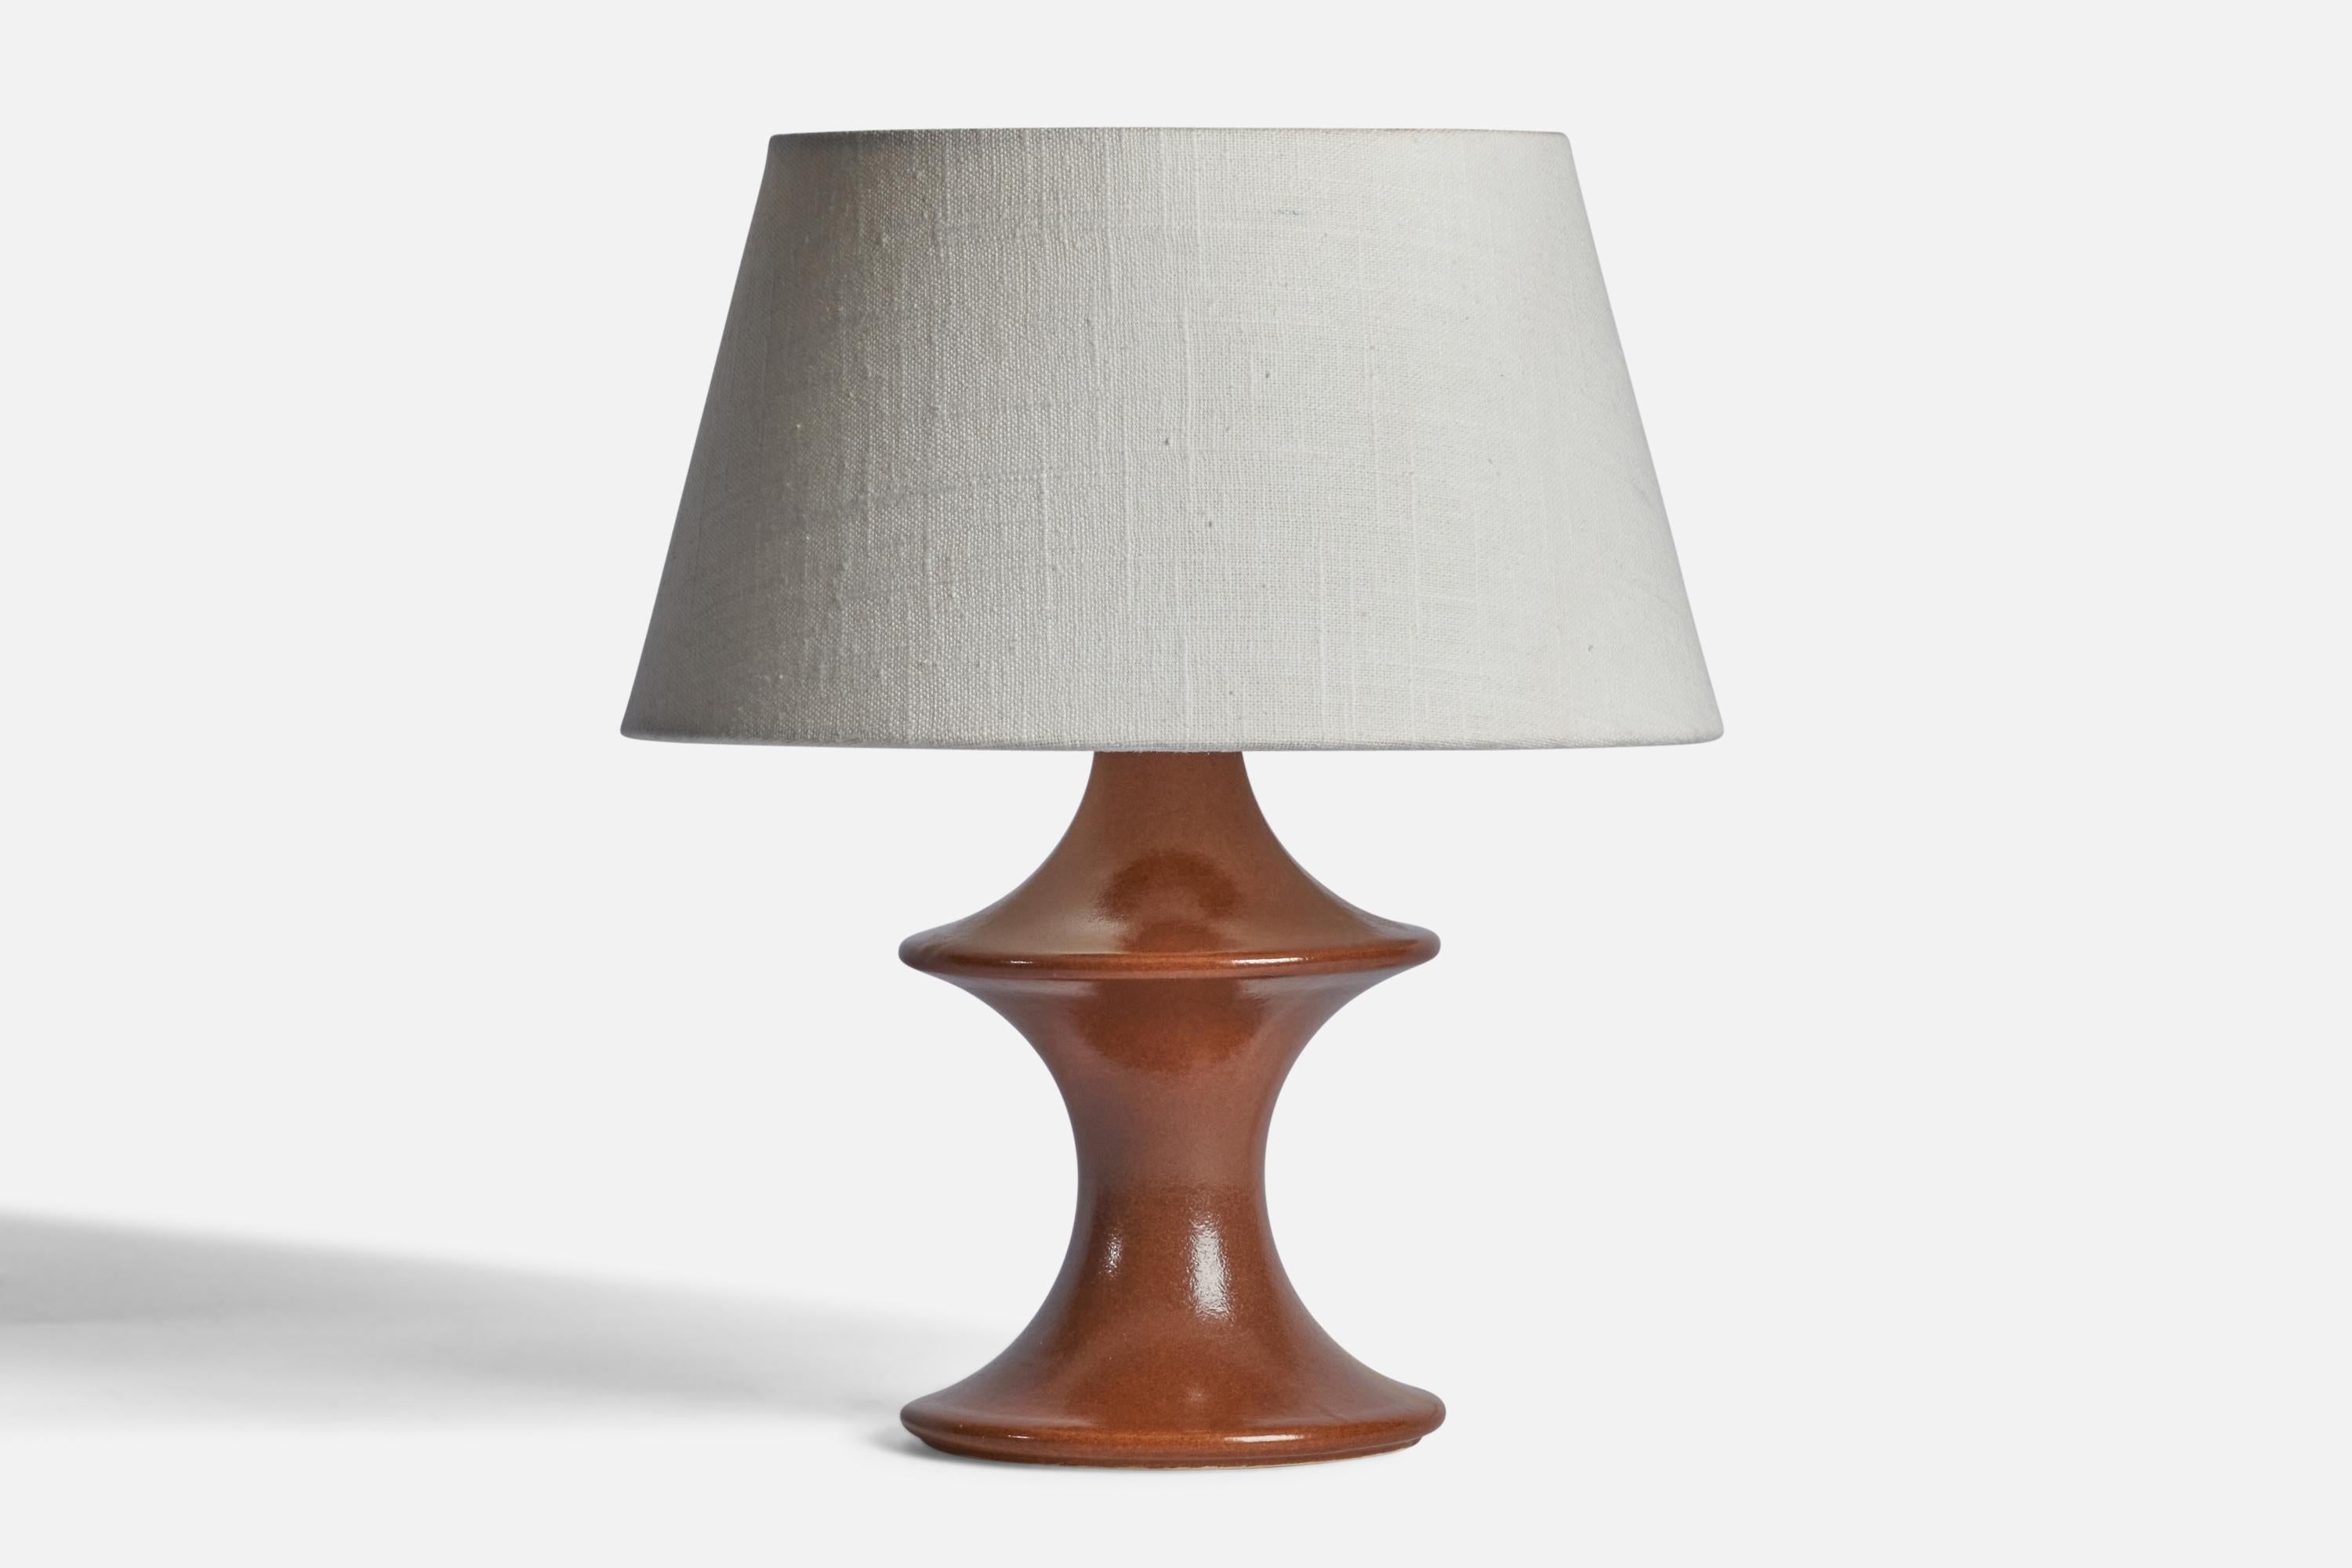 A brown-glazed stoneware table lamp designed and produced by Hassle, Bornholm, Denmark, 1960s.

Dimensions of Lamp (inches): 9